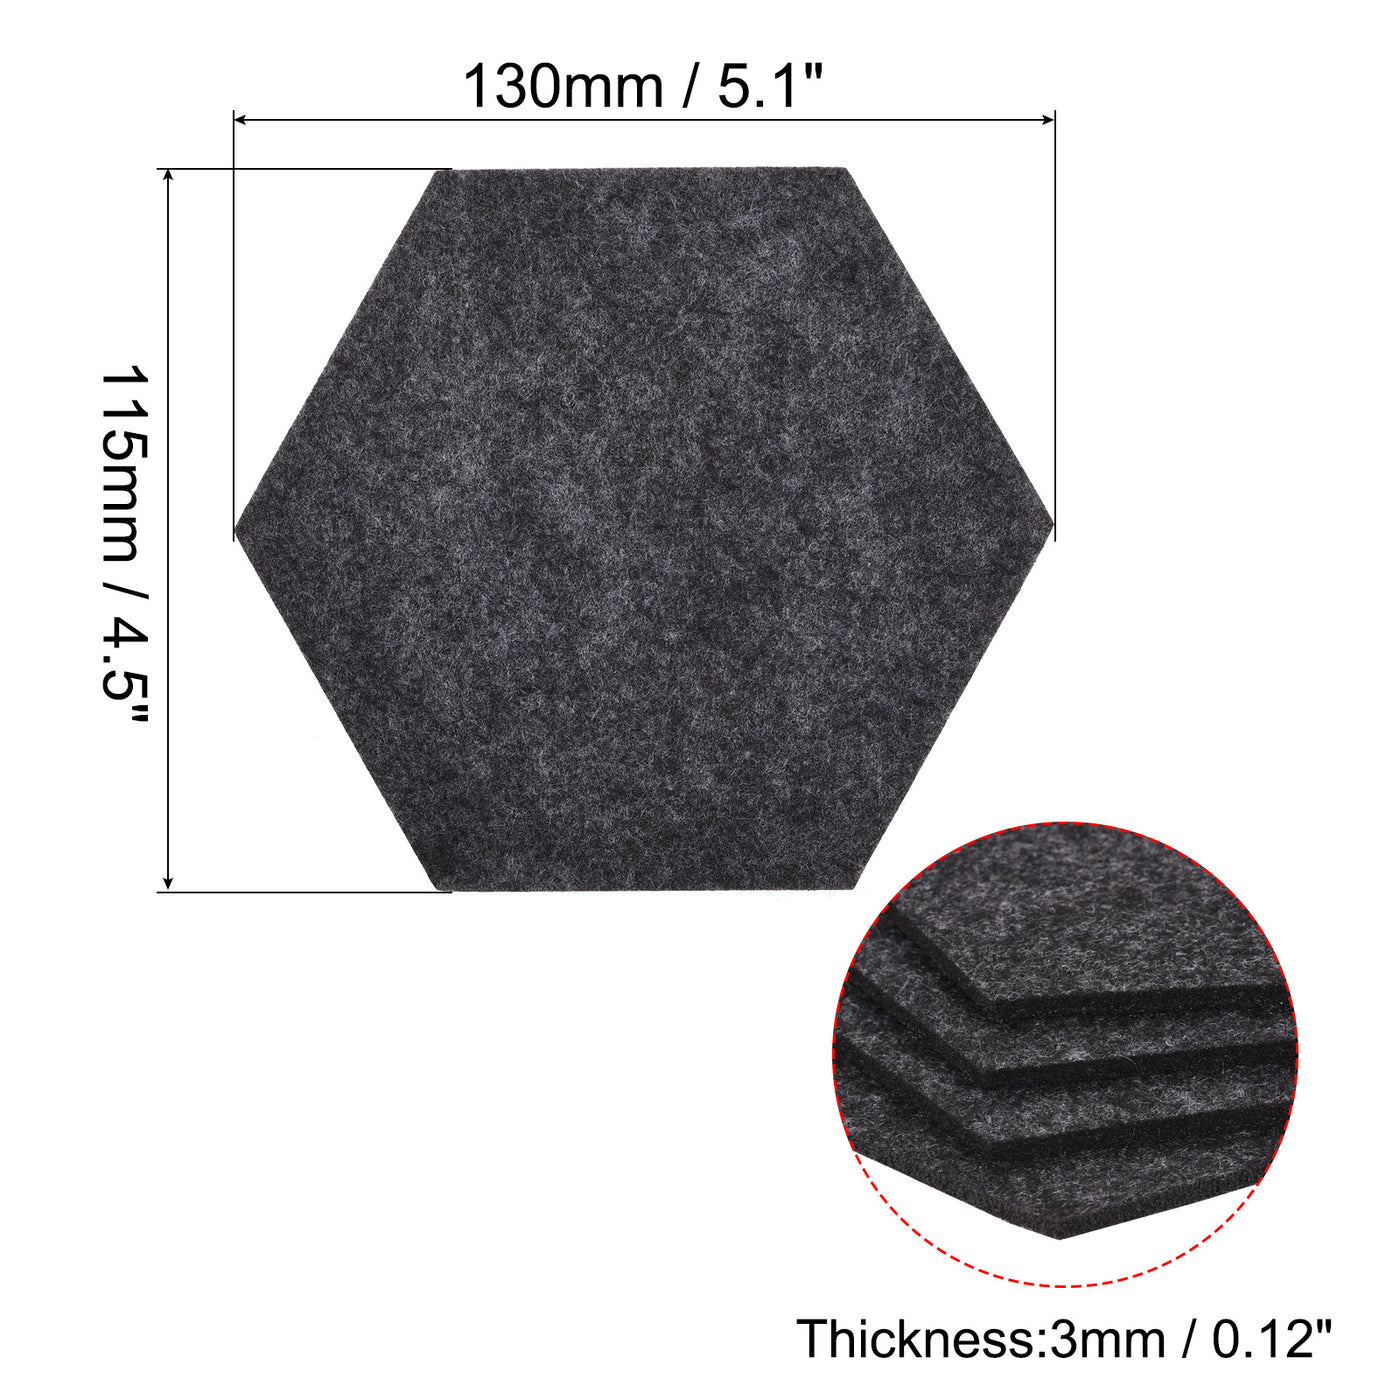 uxcell Uxcell Felt Coasters 4pcs Absorbent Pad Coaster for Drink Cup Pot Bowl Vase Gray